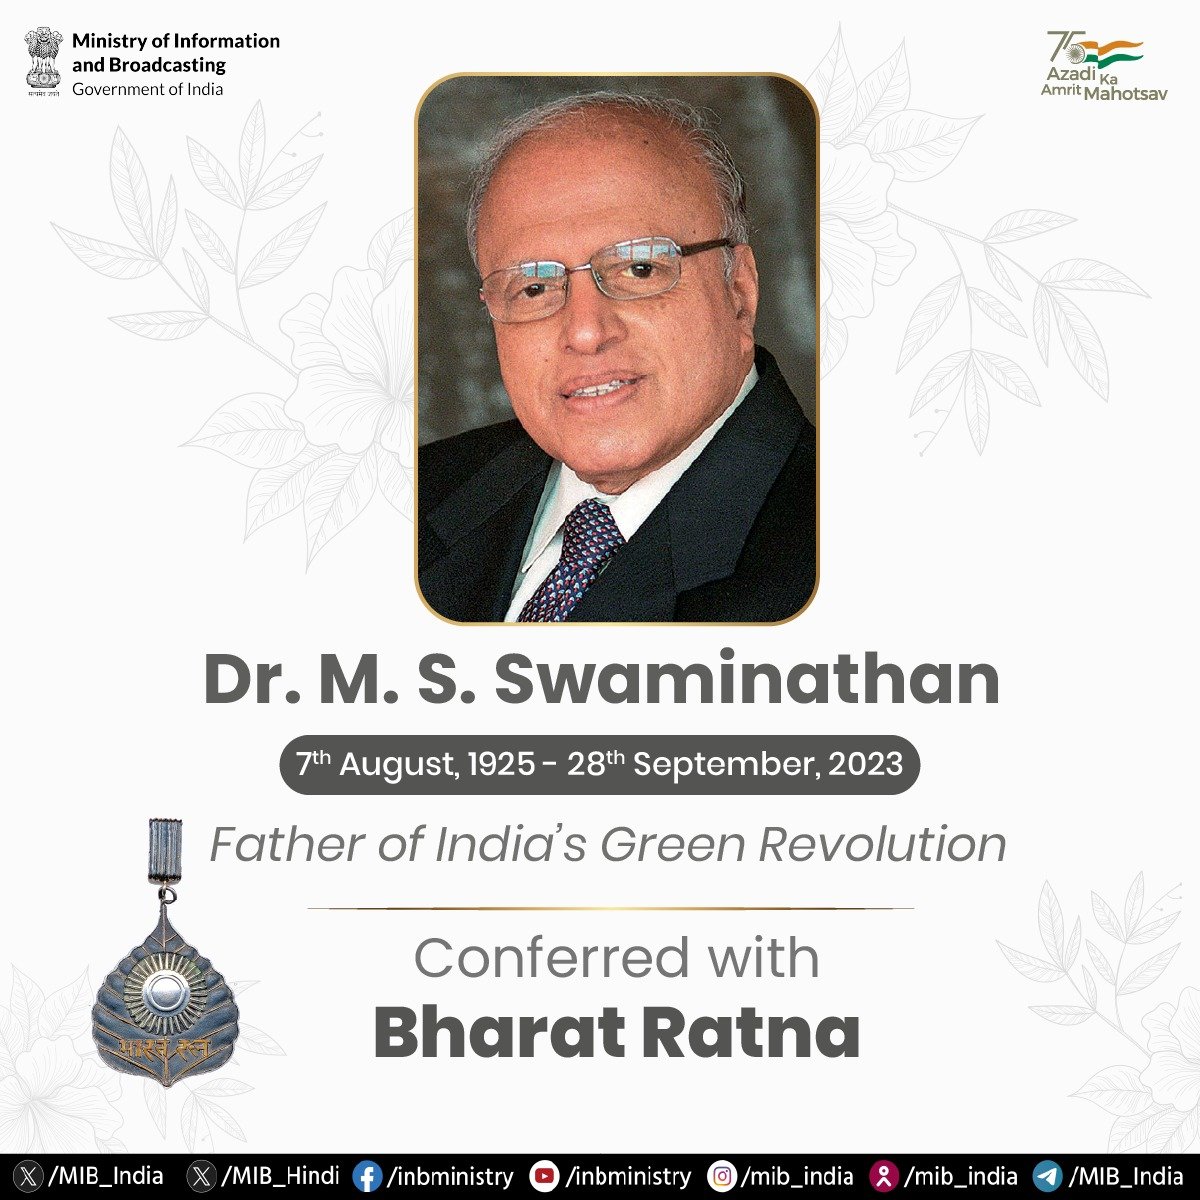 @narendramodi As Dr. M.S. Swaminathan Ji is conferred with the #BharatRatna, we celebrate his pioneering work in agricultural research and sustainable development. His vision continues to nourish our nation and inspire generations! 🇮🇳